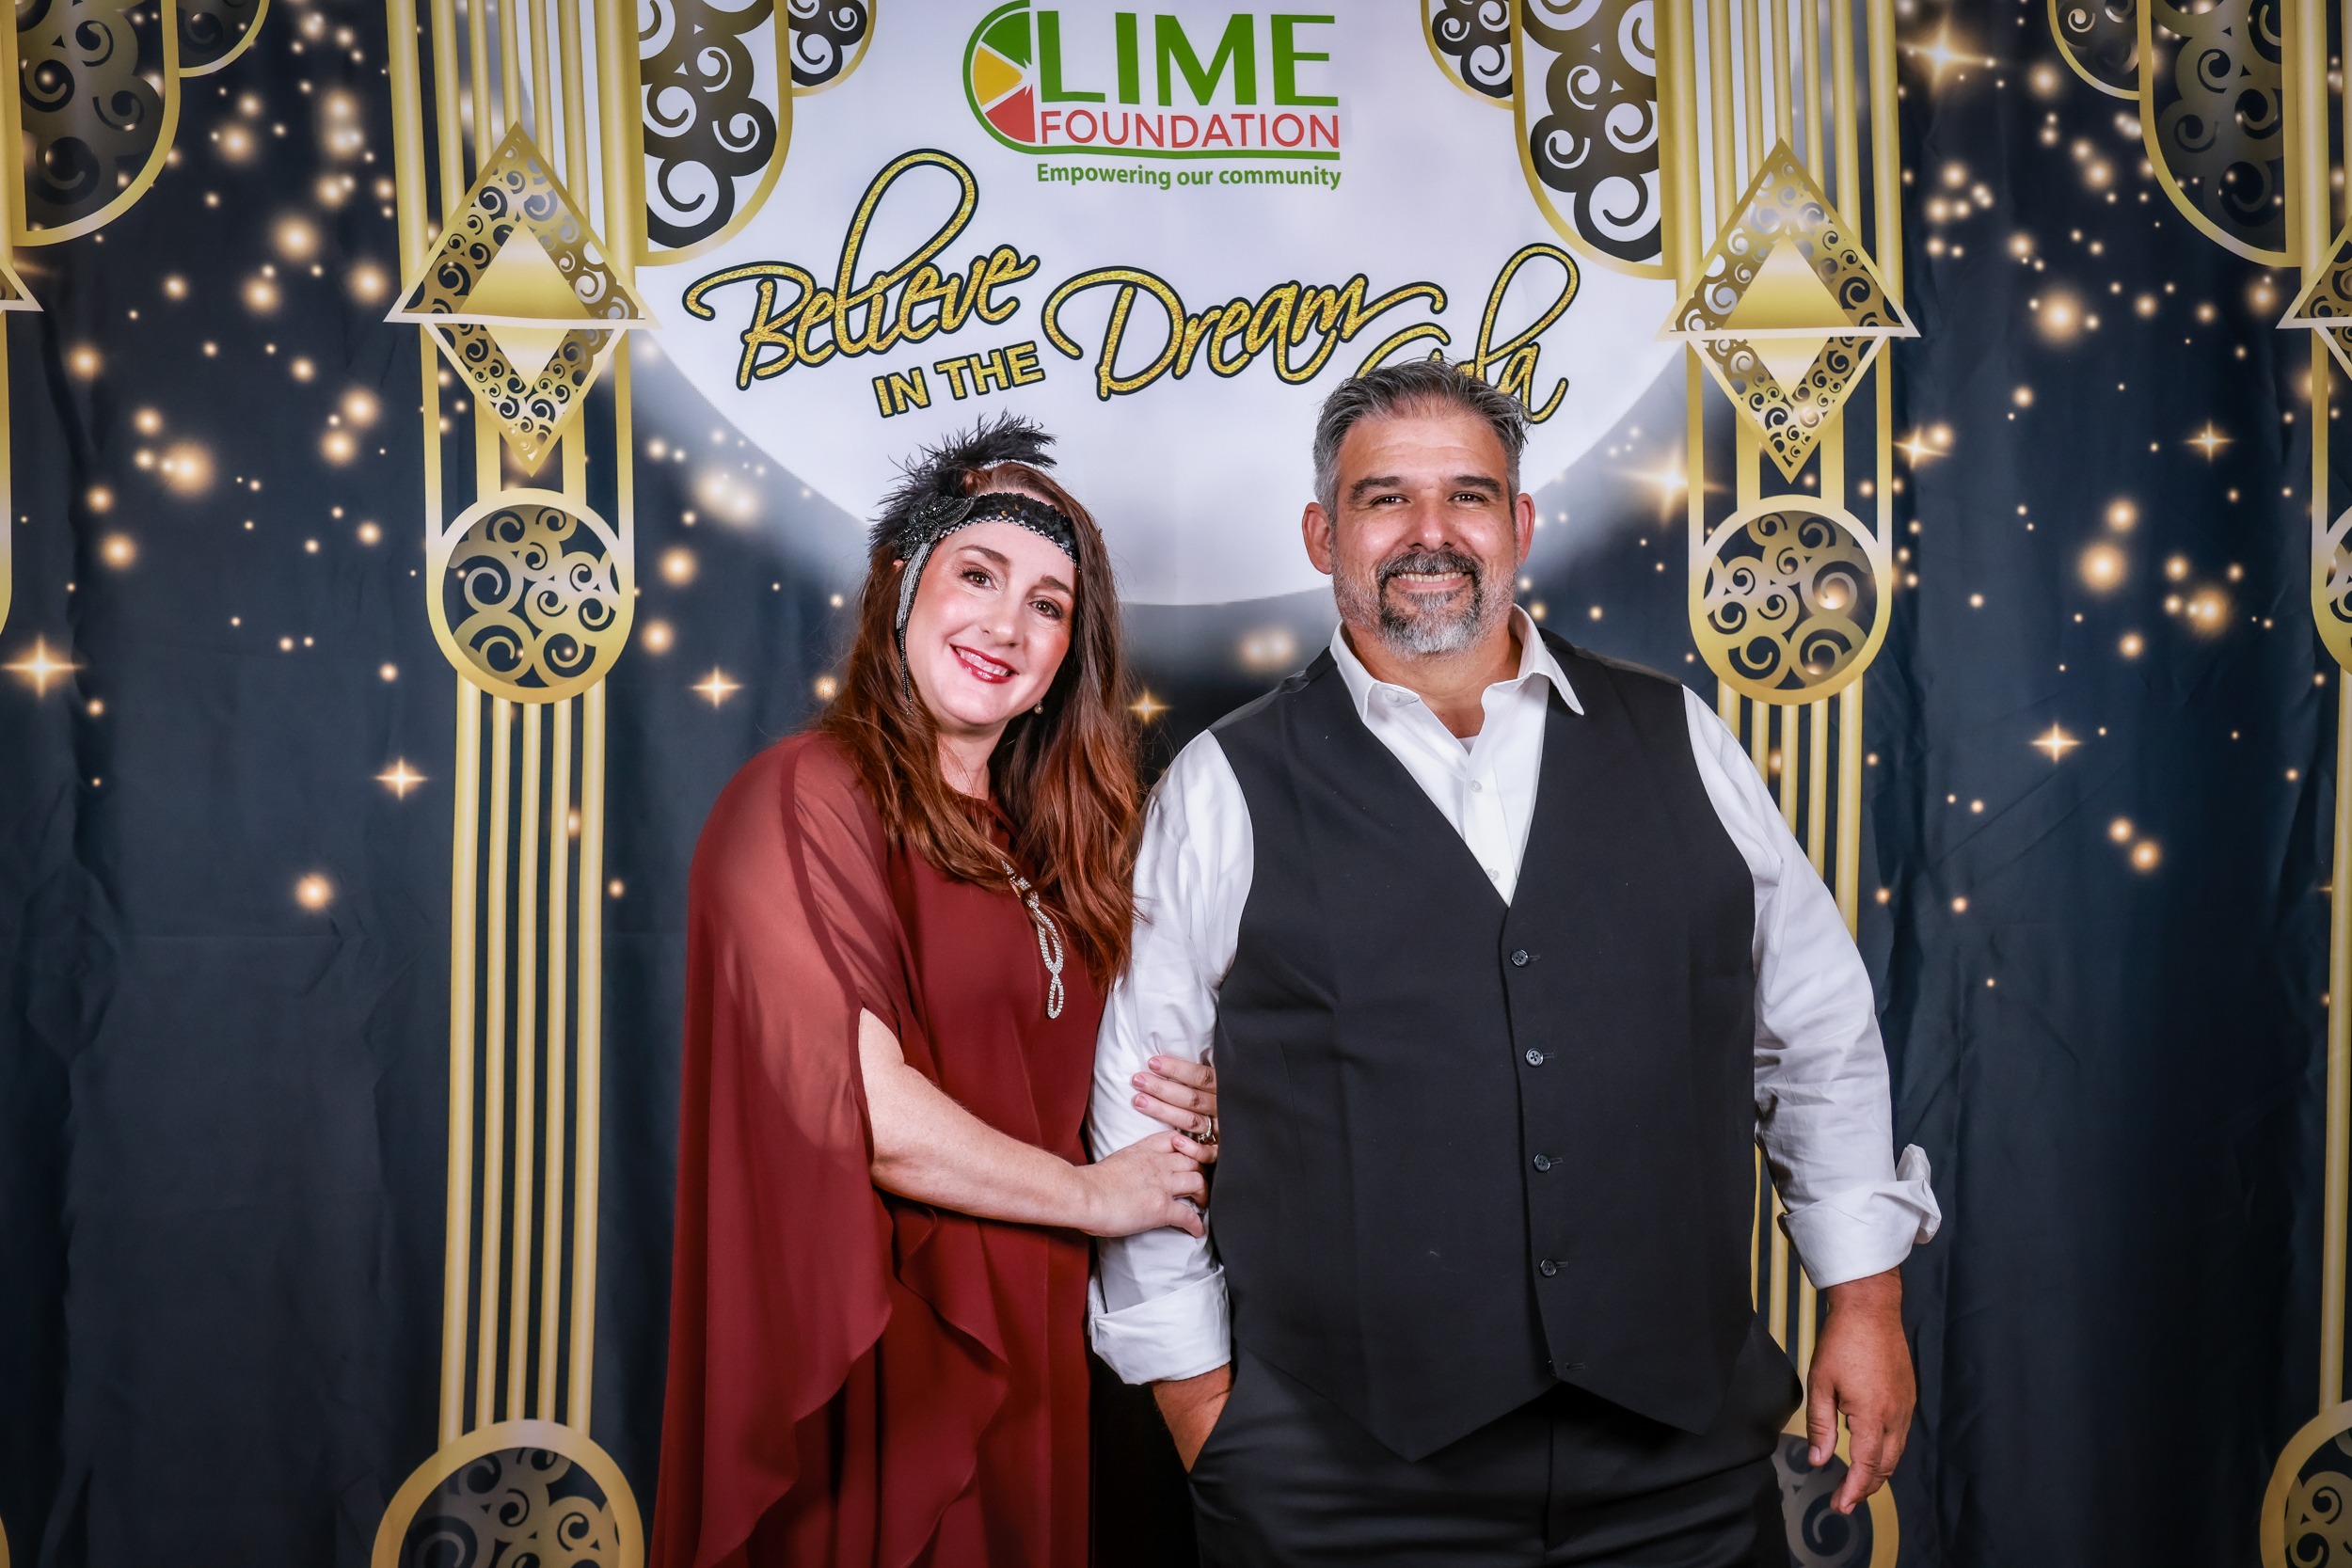 A man and woman posing in front of a photo booth at The LIME Foundation of Santa Rosa.